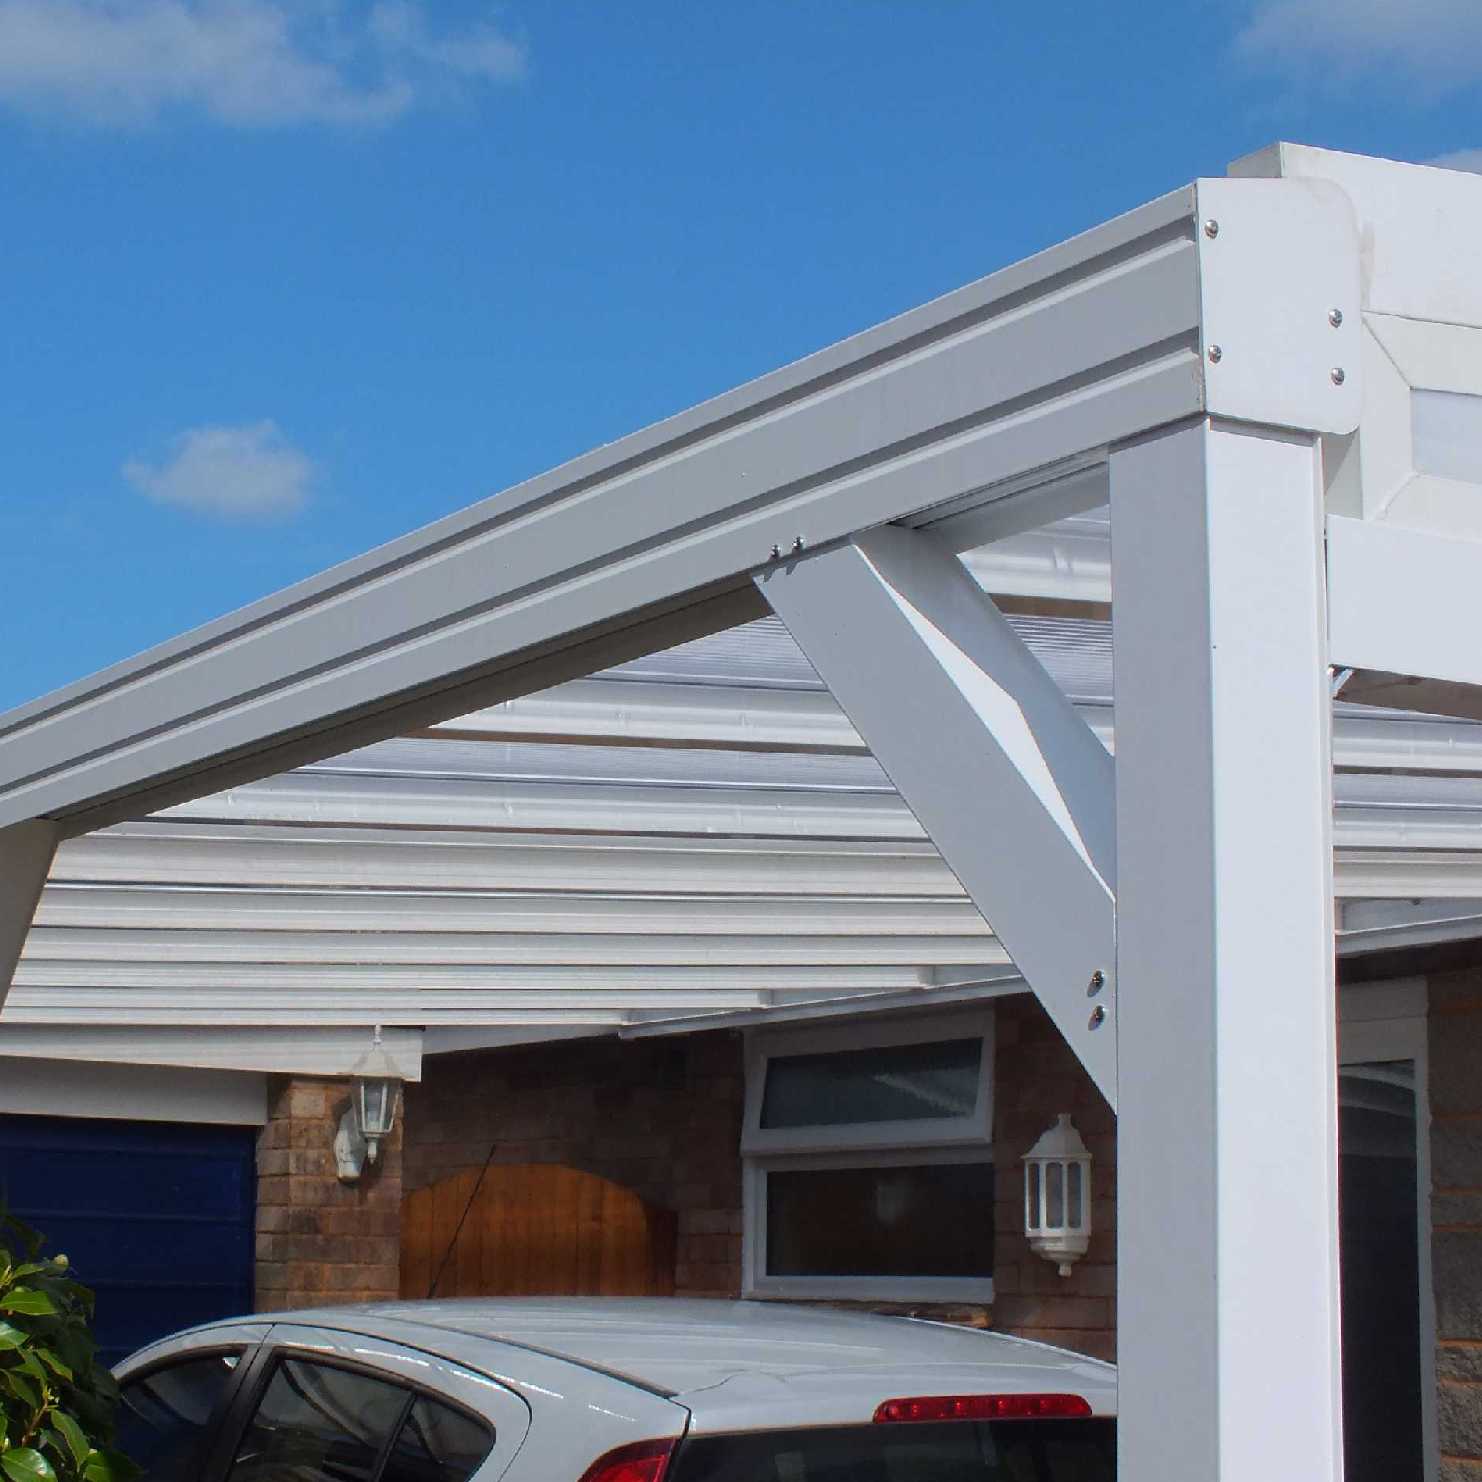 Buy Omega Smart Lean-To Canopy, White with 16mm Polycarbonate Glazing - 4.8m (W) x 4.5m (P), (3) Supporting Posts online today